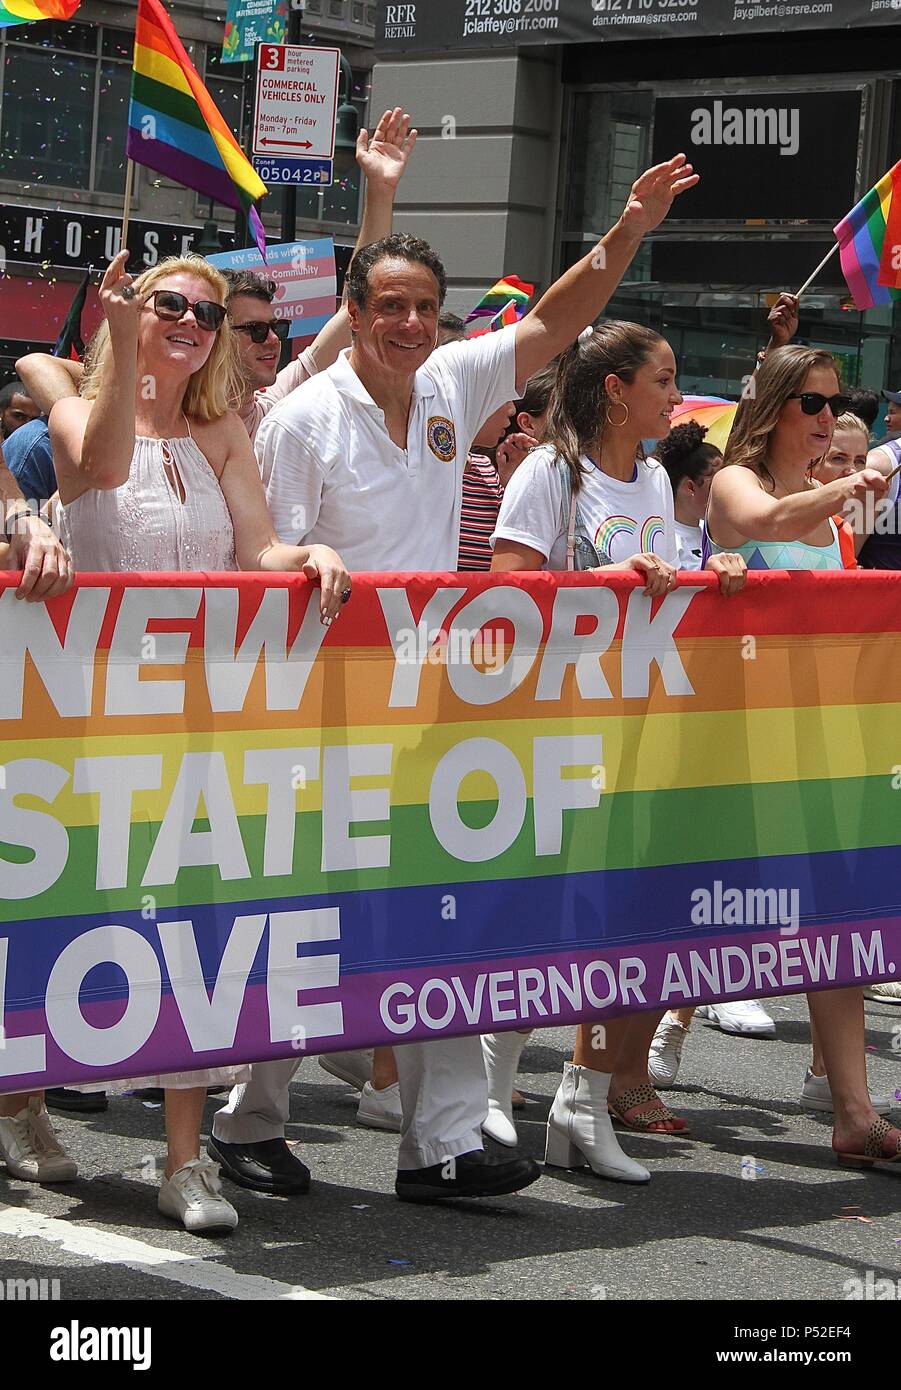 New York, NY, USA. 24th June, 2018. New York State Governor Andrew Cuomo and celebrity chef Sandra Lee in the 2018 NYC Pride Parade in New York, New York on June 24, 2018. Credit: Rainmaker Photo/Media Punch/Alamy Live News Stock Photo